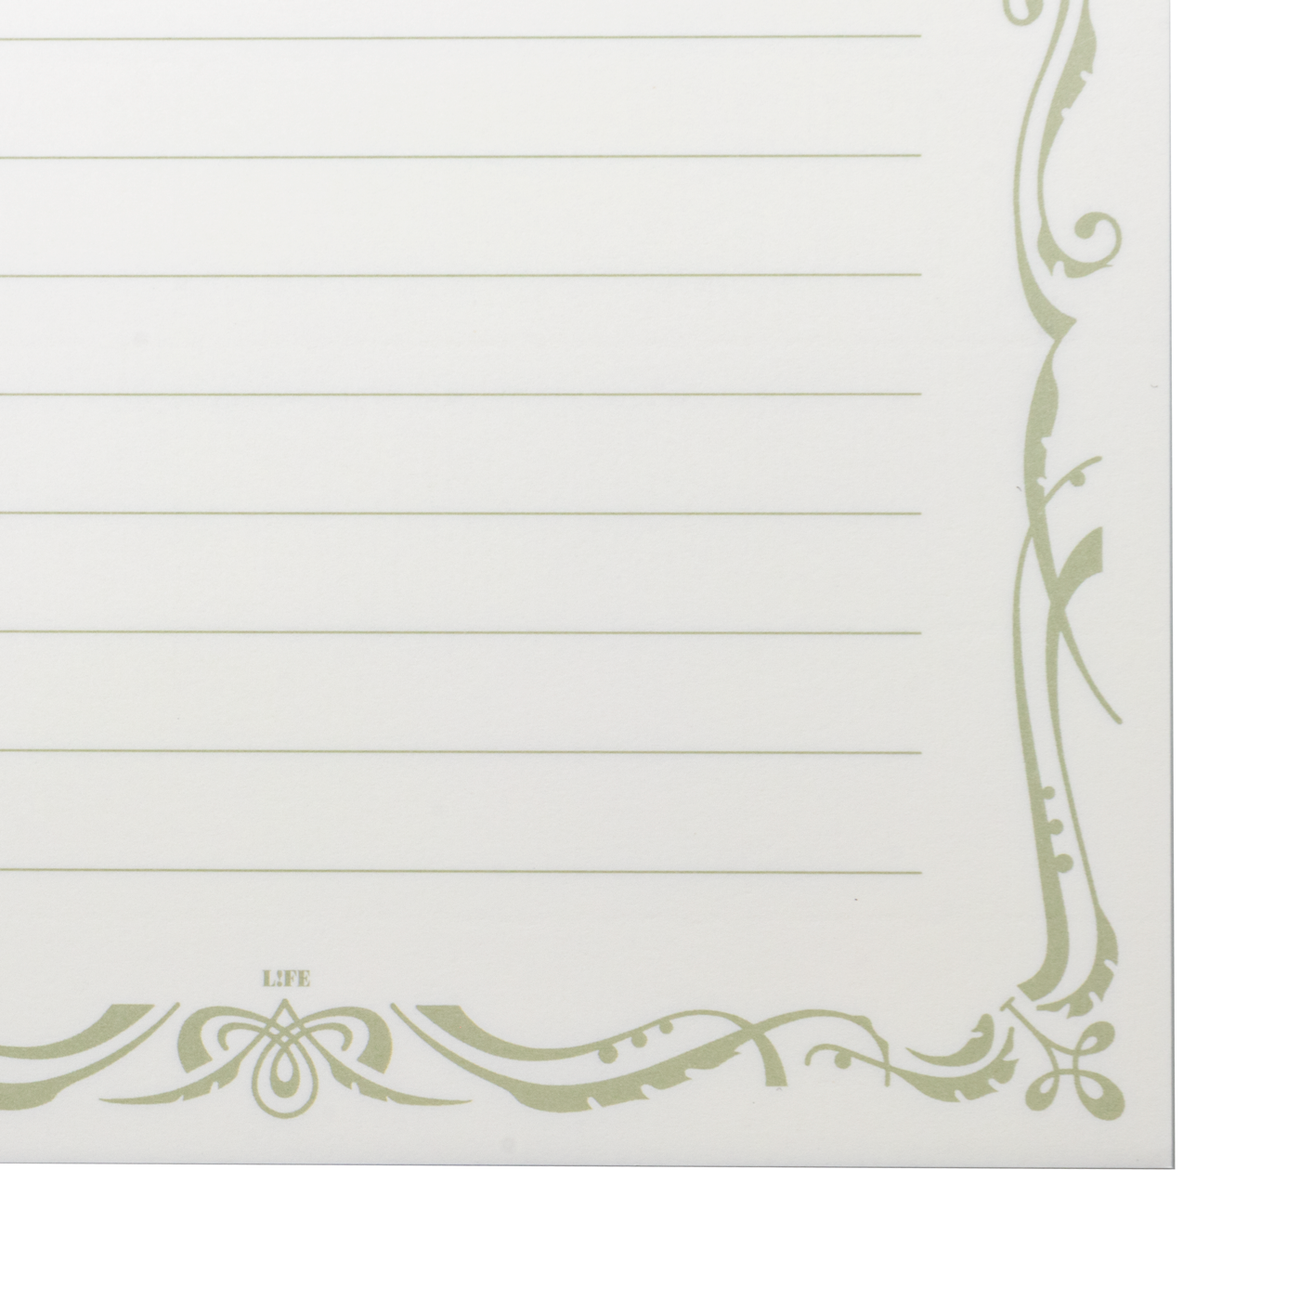 Life Stationery A5 Writing Pad & Envelopes {multiple styles}